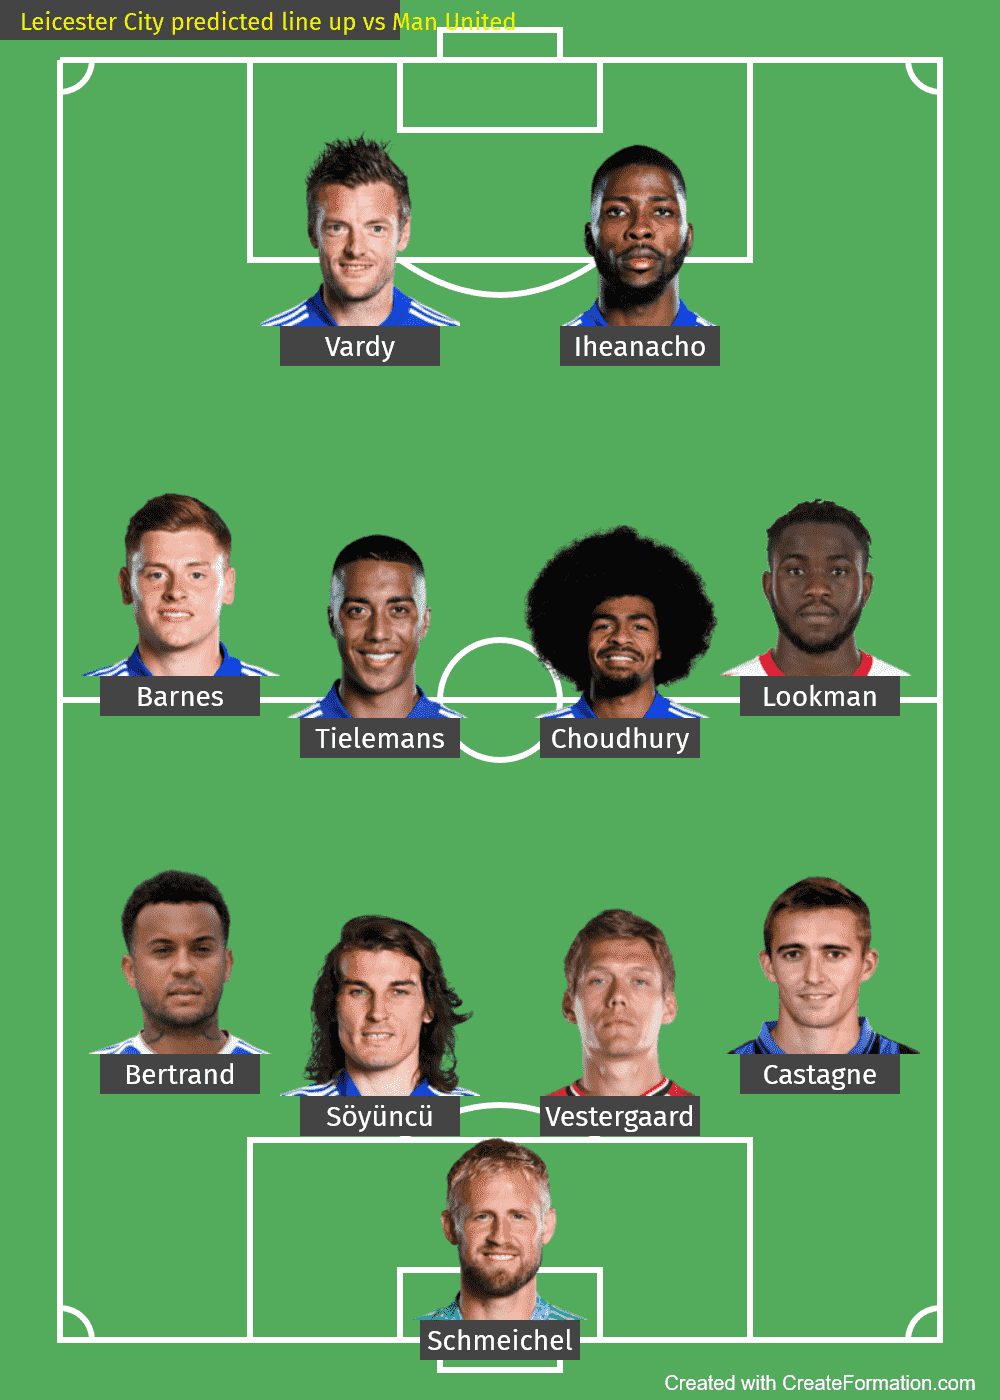 Leicester City predicted line up vs Man United